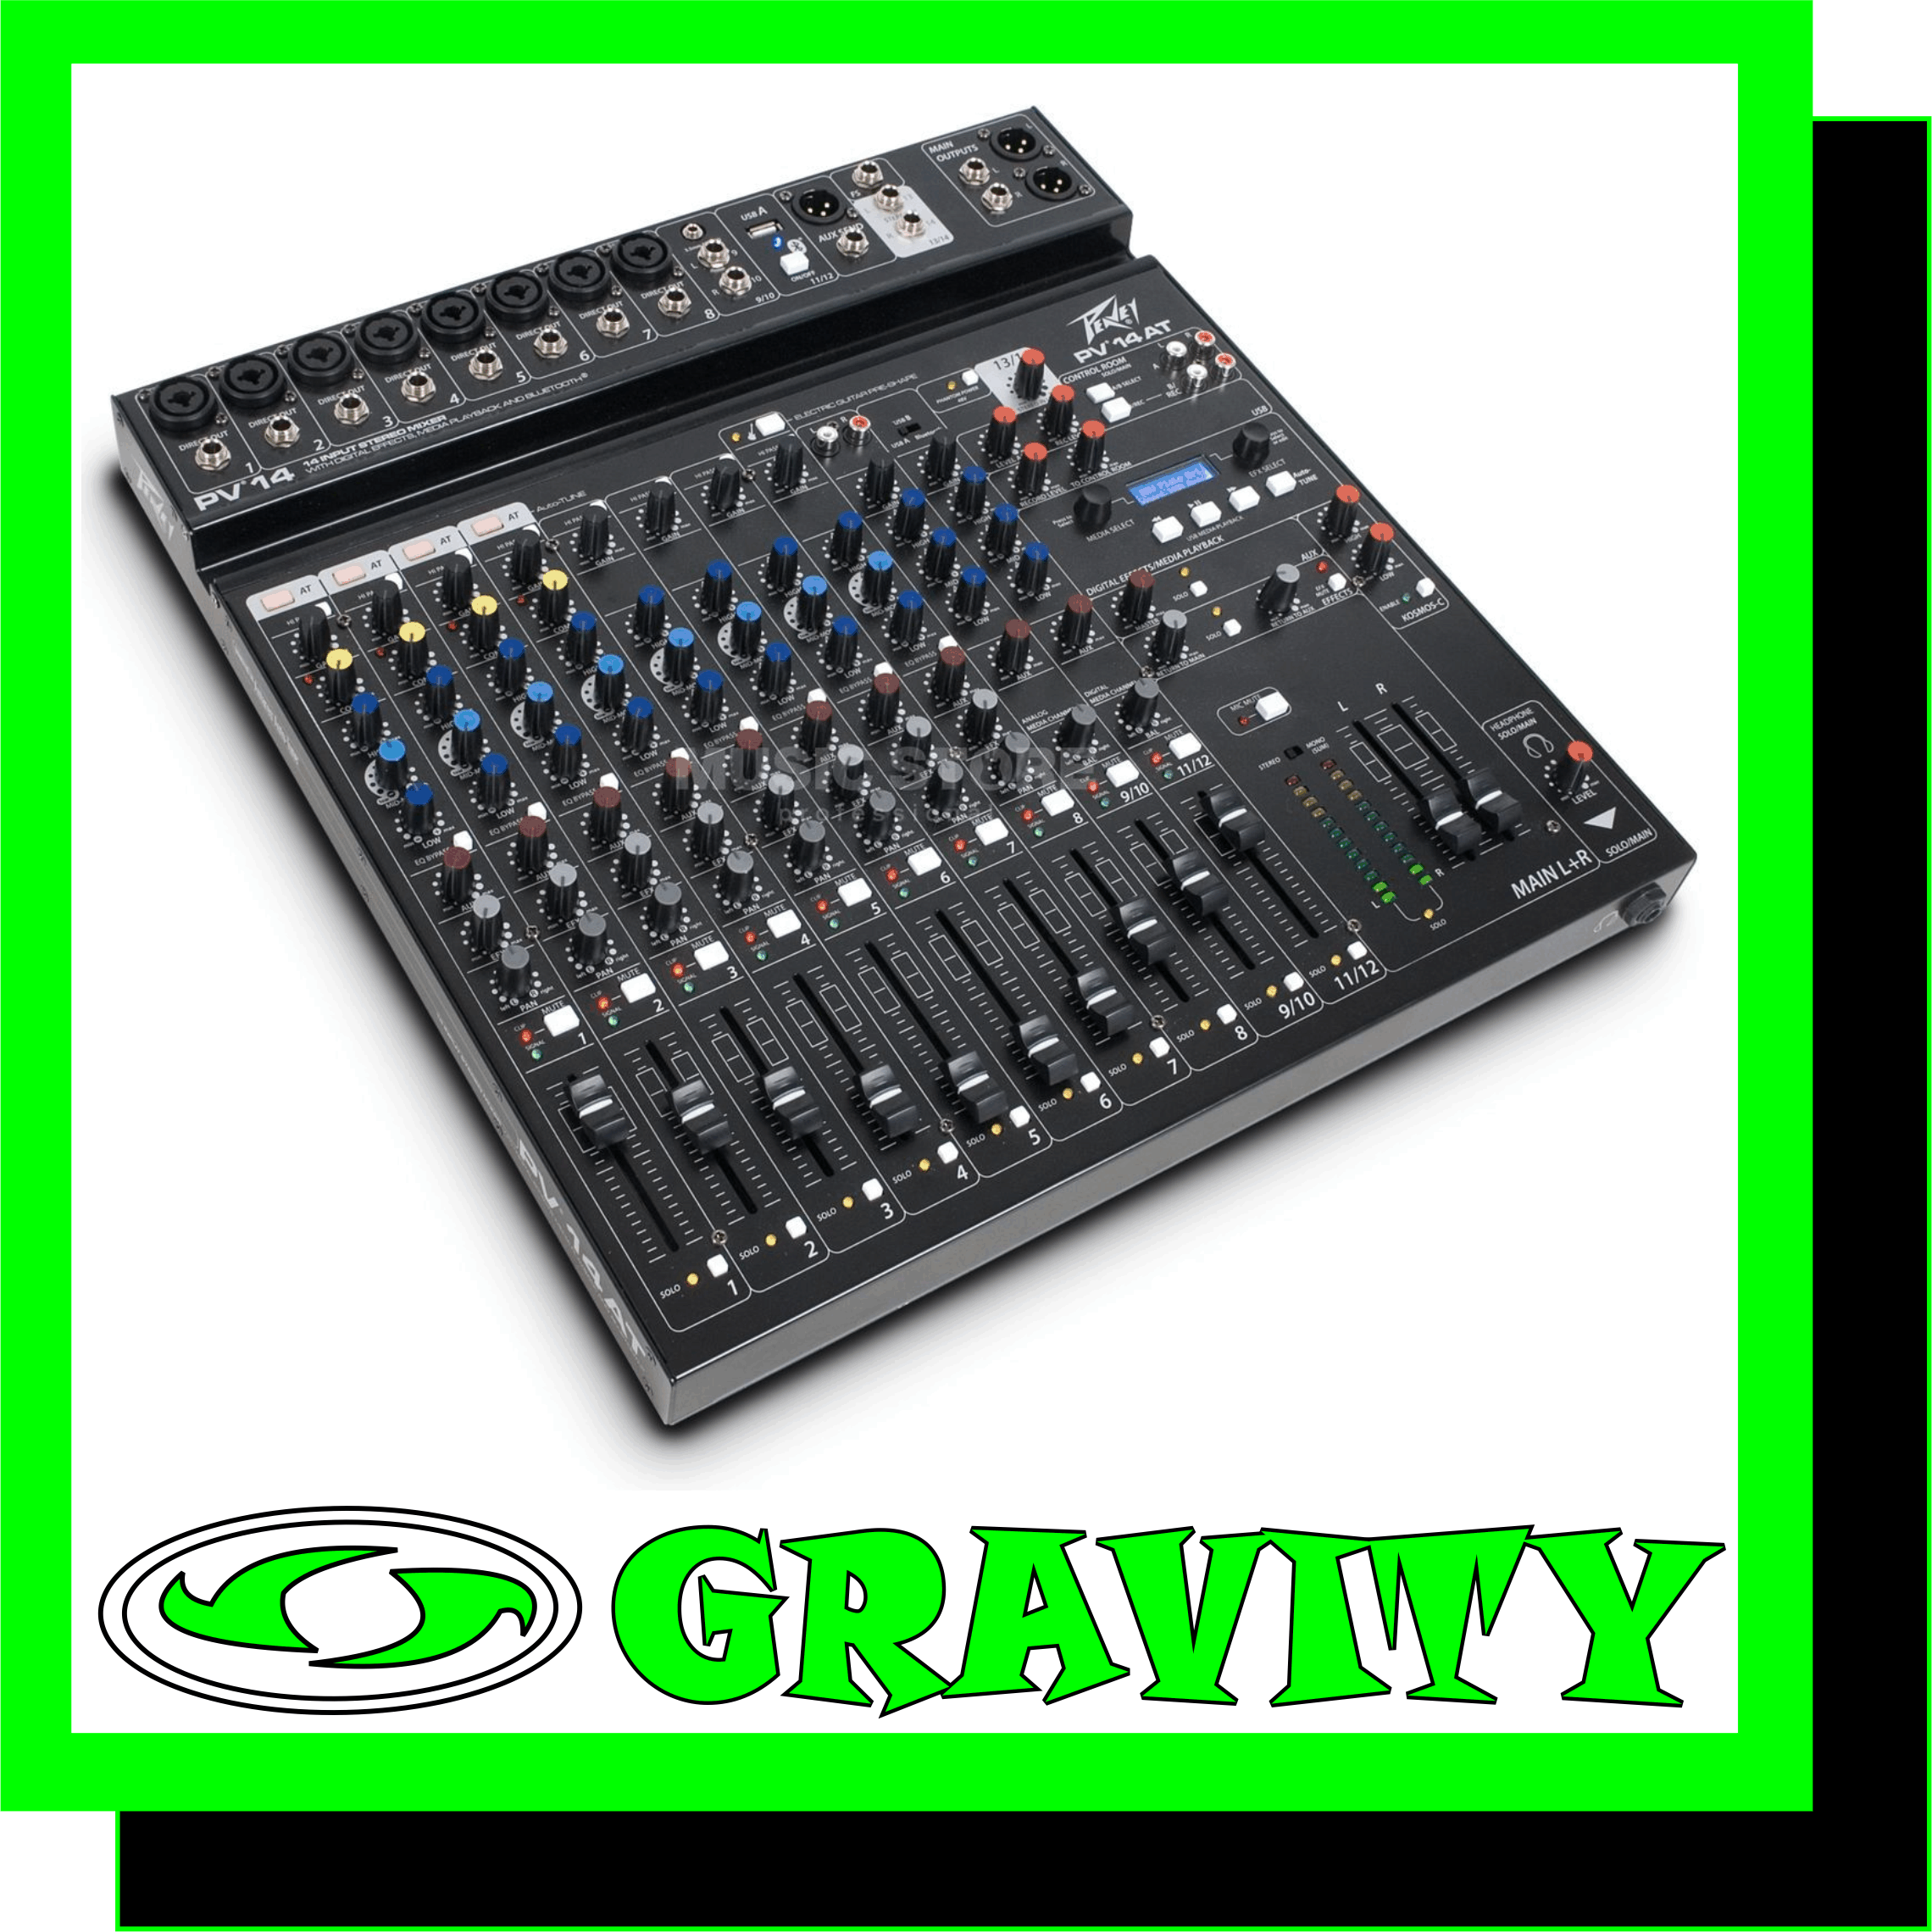 14 INPUT MIXER, 8 COMBINATION XLR-1/4 INPUTS, 2 SWICHABLE STEREO CHANNELS, BLUETOOTH CONNECTIVETY. STEREO USB AUDIO STREAMING, ON BOARD HI-Z GUITAR INPUT, BUILT IN COMPRESSION, EQ BYPASS PER CHANNEL, IPAD / IPOD / PHONE CRADLE